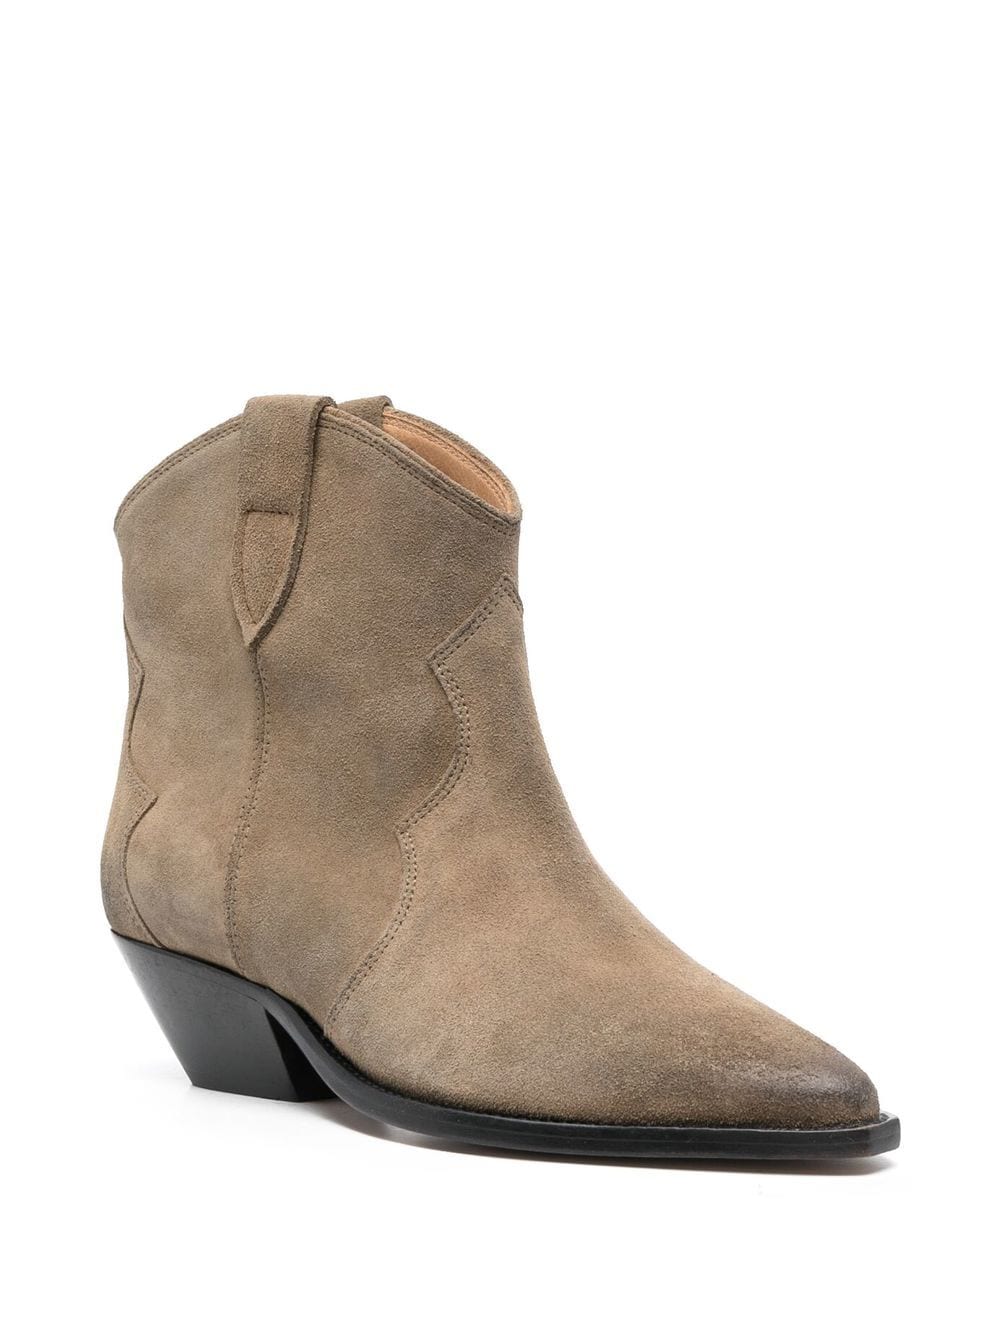 DEWINA boots, taupe